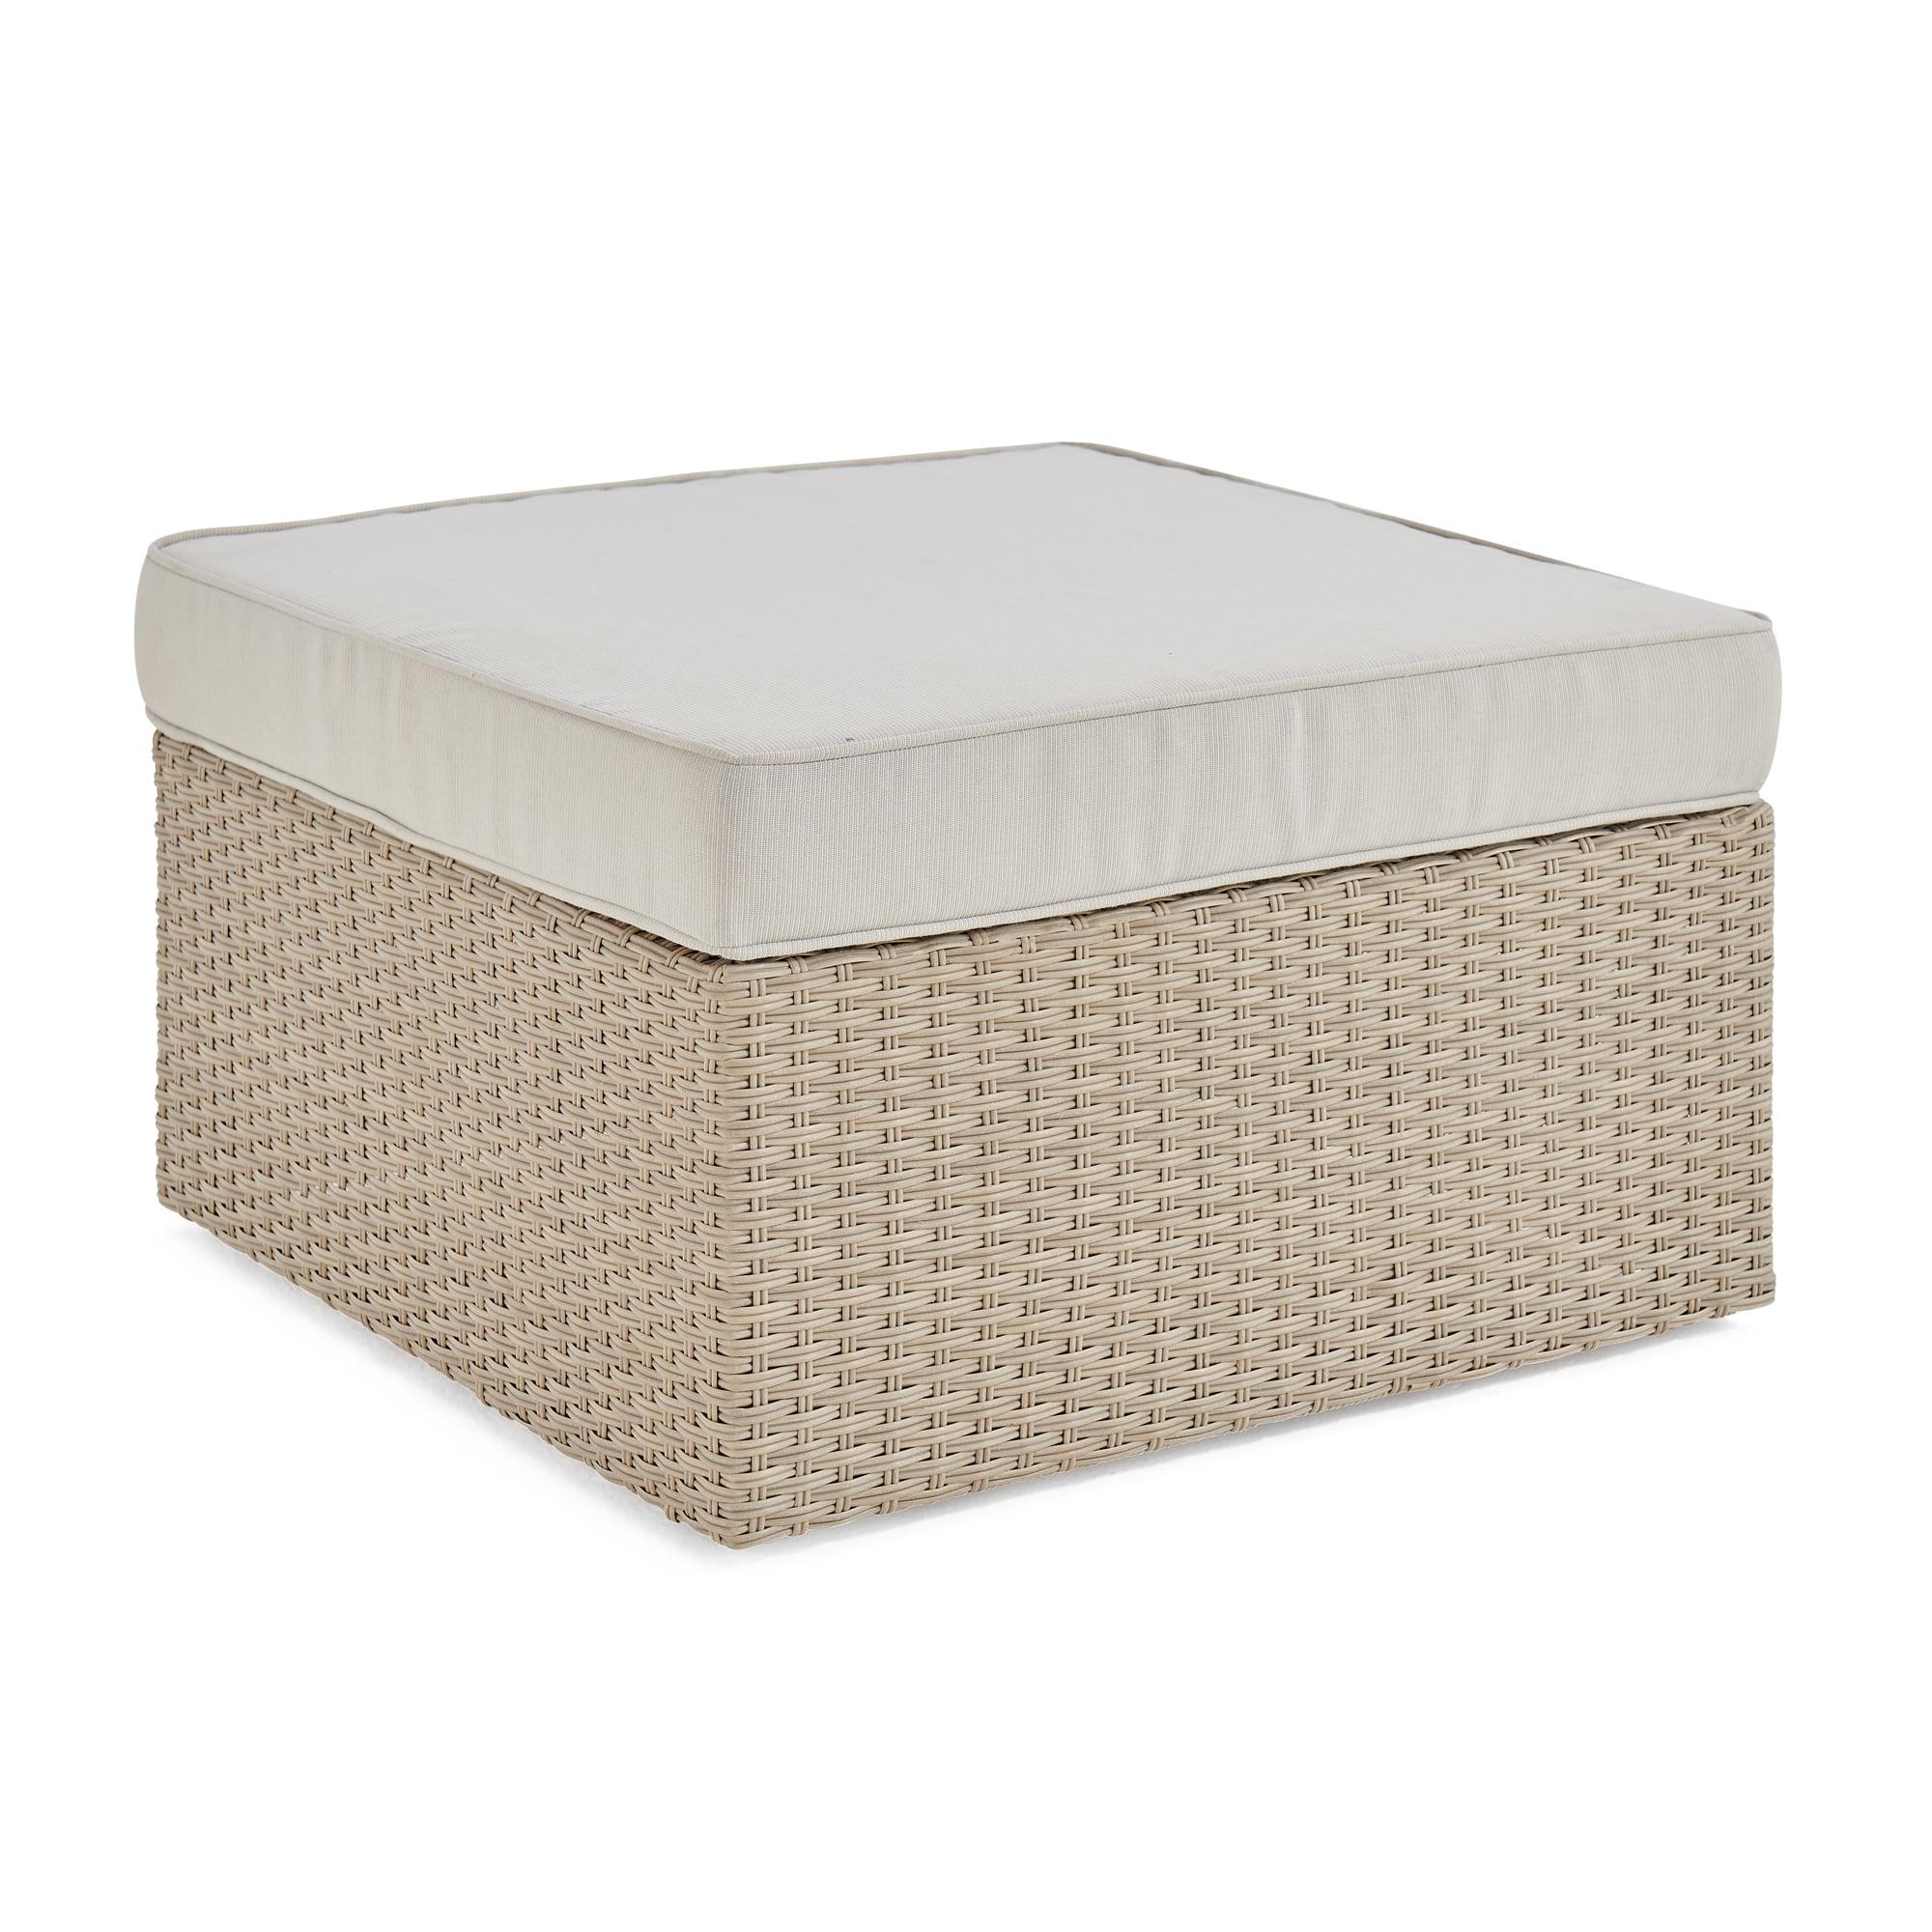 Canaan 26" Square All-Weather Wicker Outdoor Ottoman with Cushion